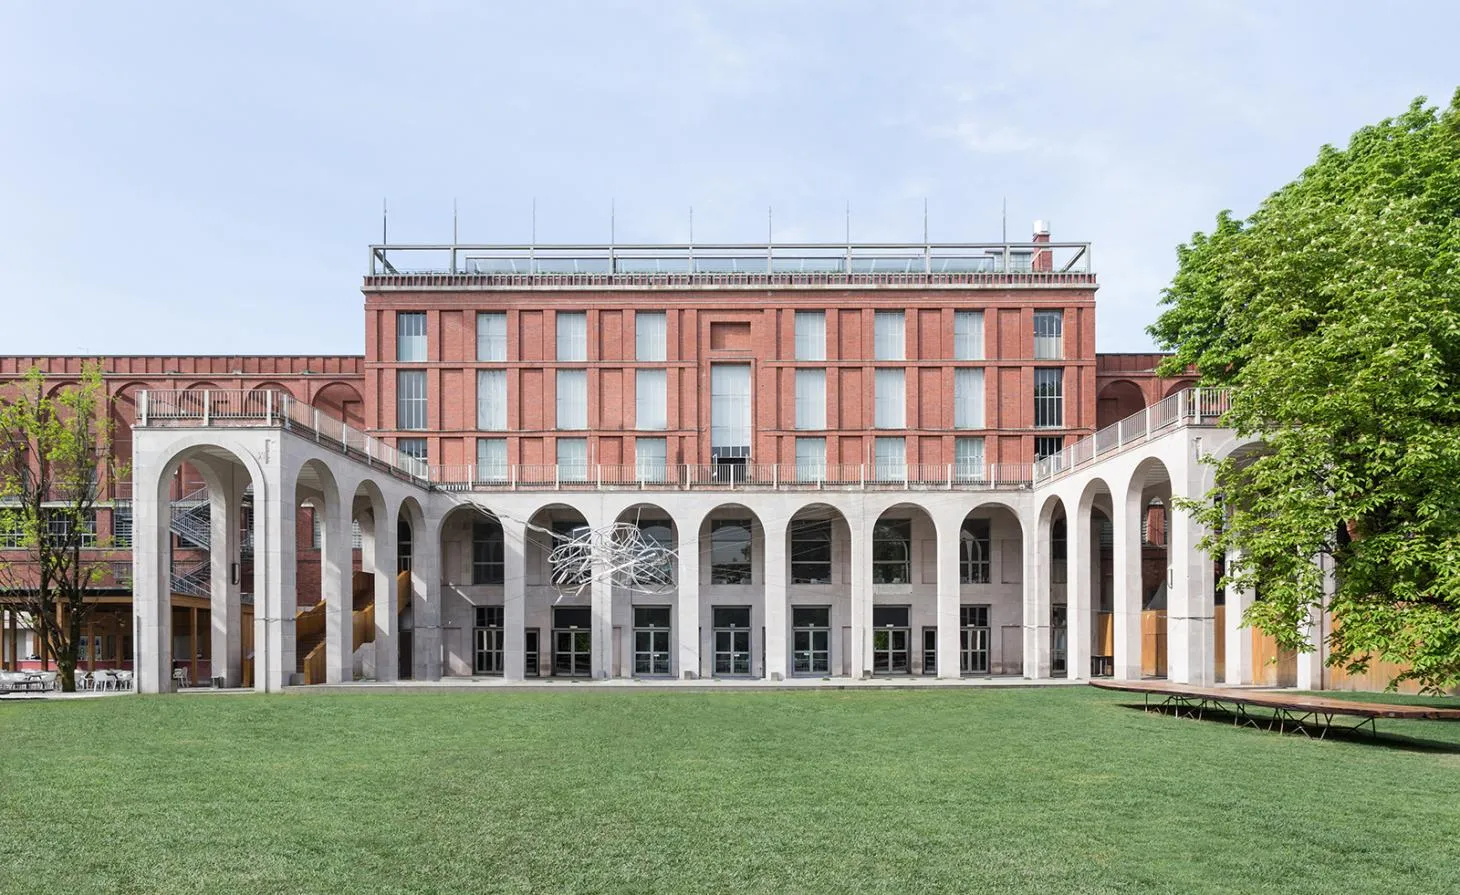 All You Need to Know about Milan Design Week 2021